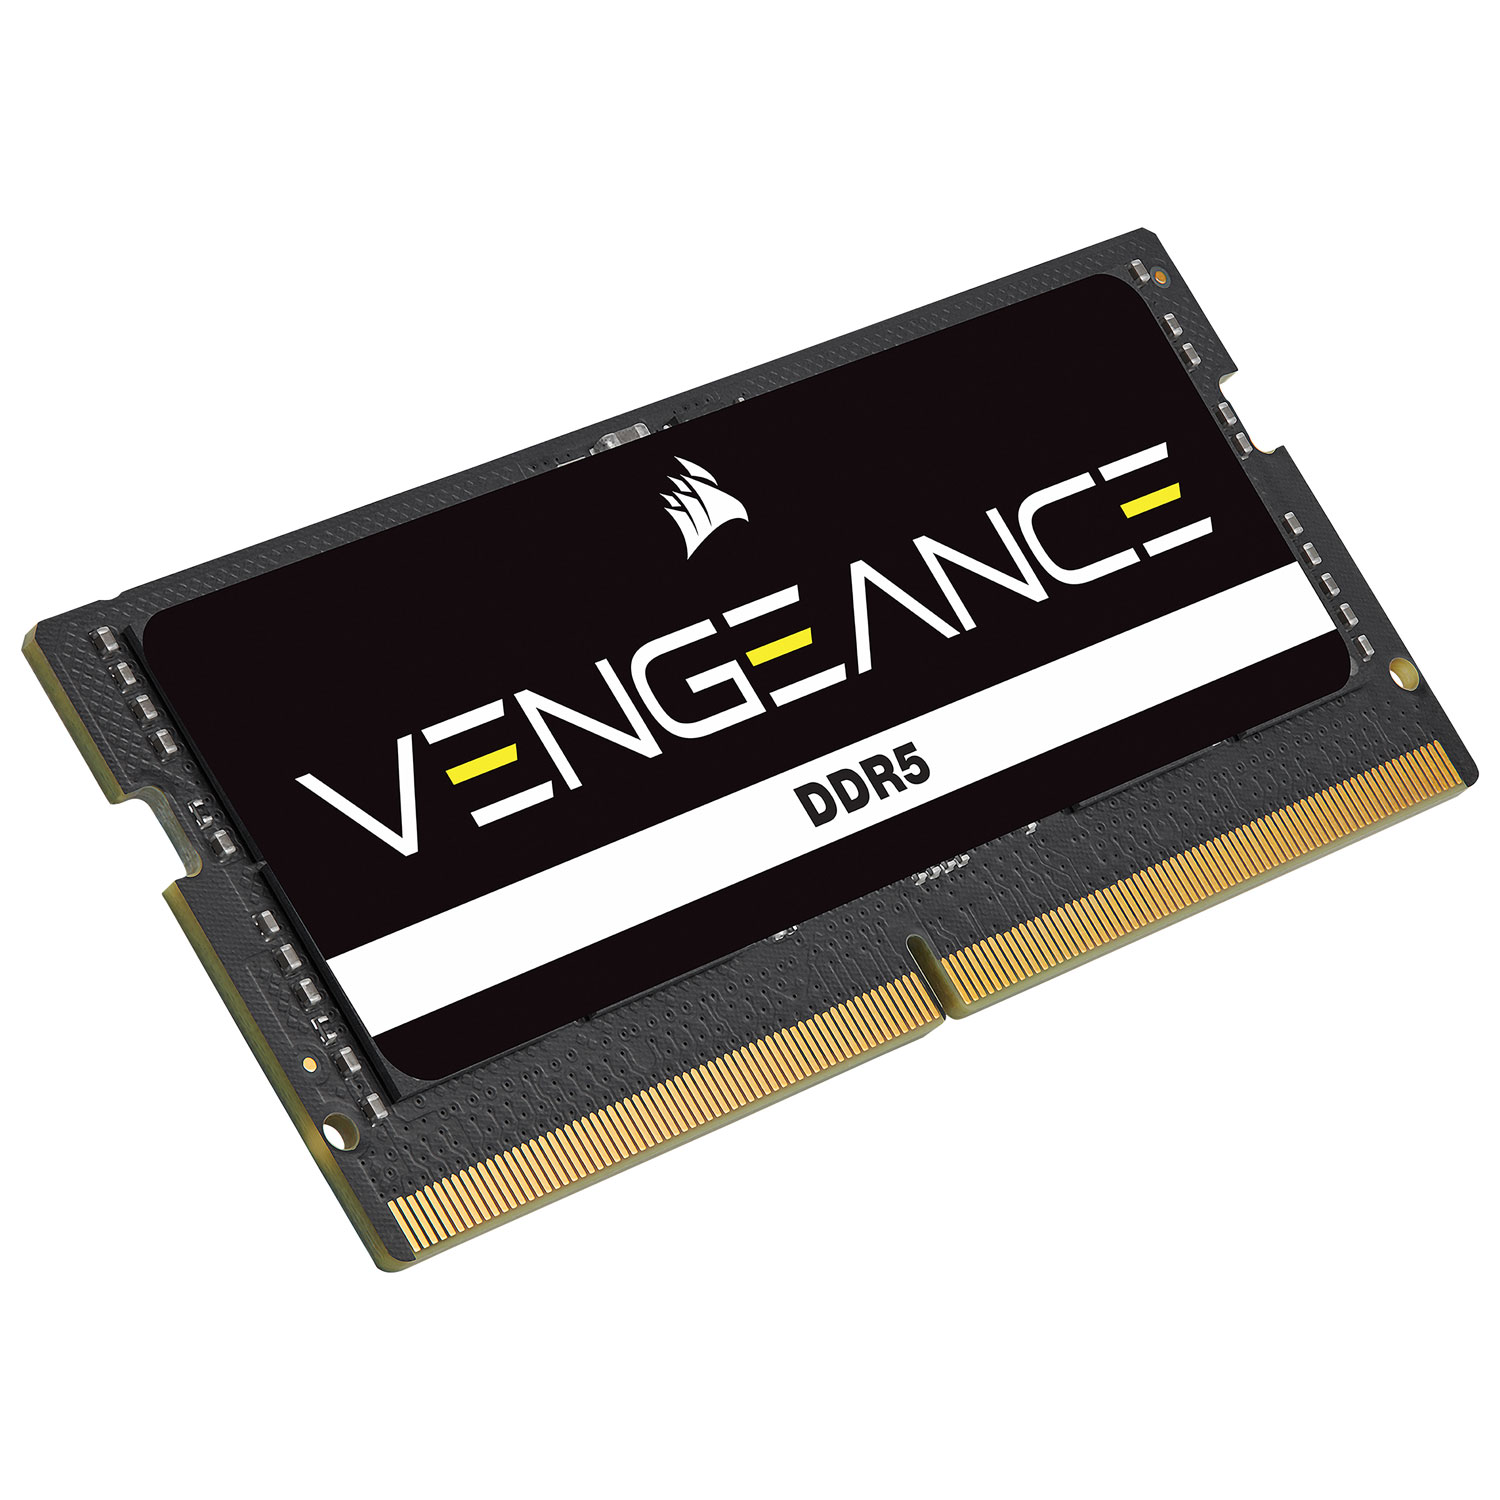 Corsair VENGEANCE DDR5 SODIMM 32GB (1x32GB) DDR5 4800MHz C40 (Compatible  with Nearly Any Intel and AMD System, Easy Installation, Faster Load Times